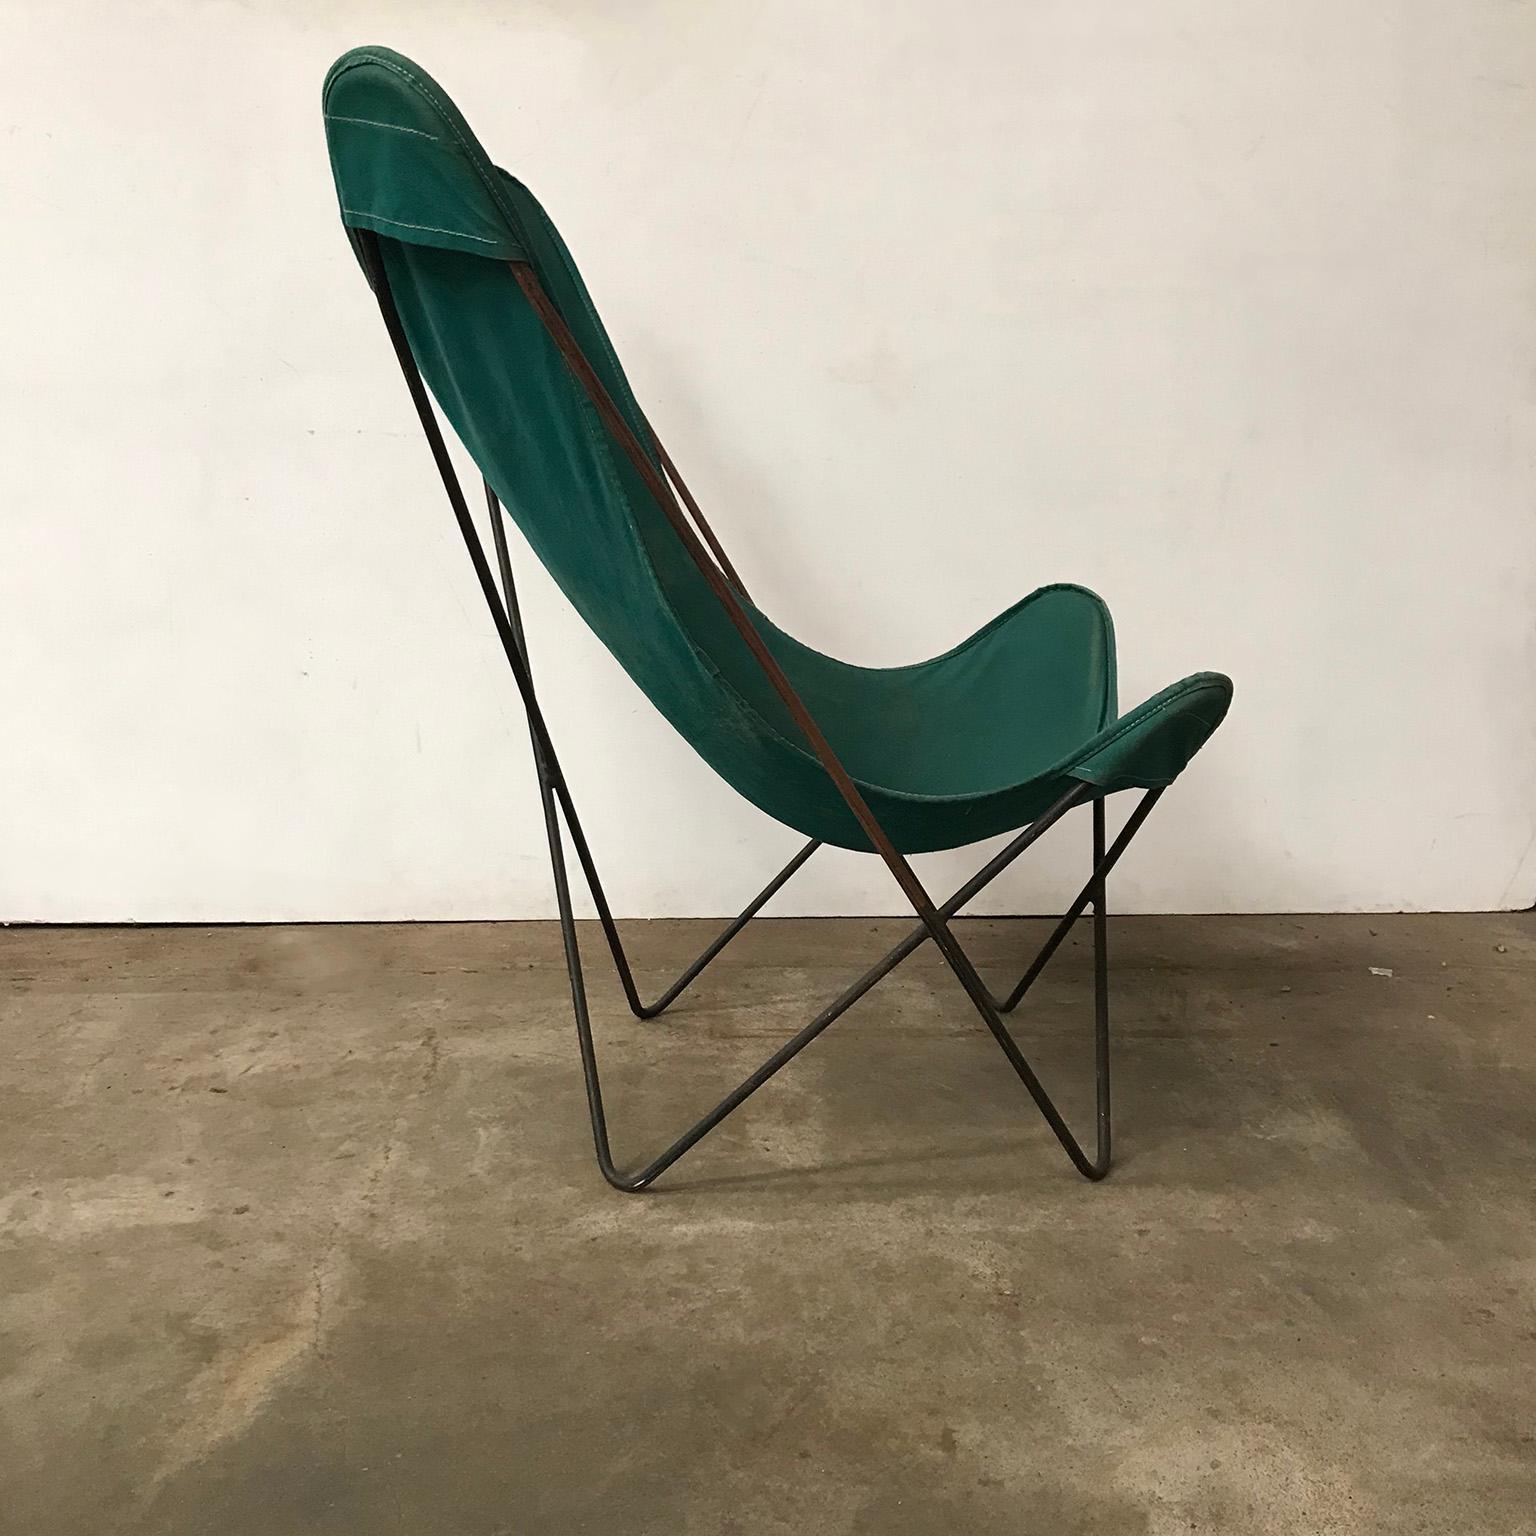 Please ask Casey Godrie Ibiza/Amsterdam for a competitive shipping quote.

Green butterfly in green canvas and black base. This butterfly fits in all kind of interior. The chair shows traces of wear like fading of color of the canvas and some stains